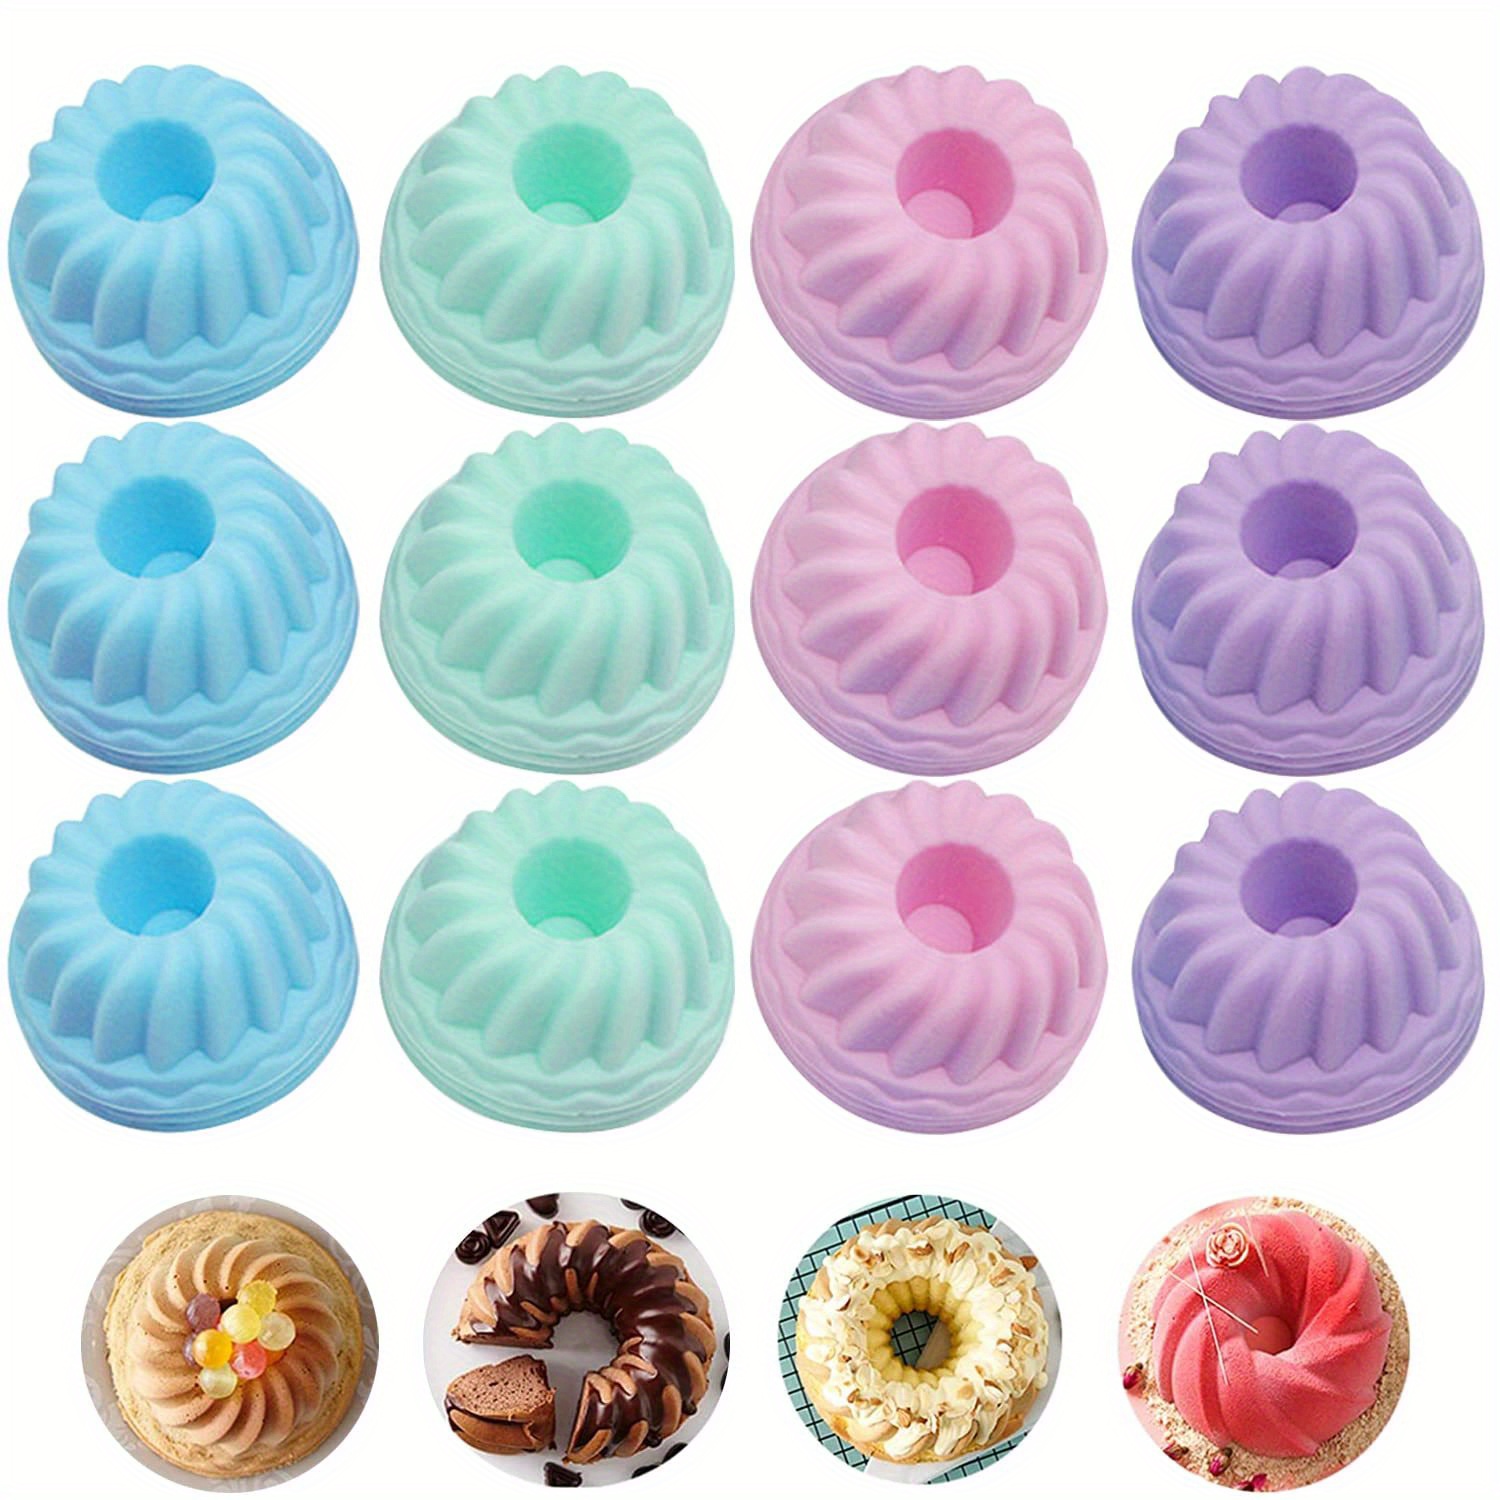 Silicone Donut Pans for Baking, 16 Pcs Mini Bundt Pan Silicone Donut Molds, Nonstick Doughnut Muffin Pumpkin Cup Cupcake Molds Pan, Mini Fluted Tube